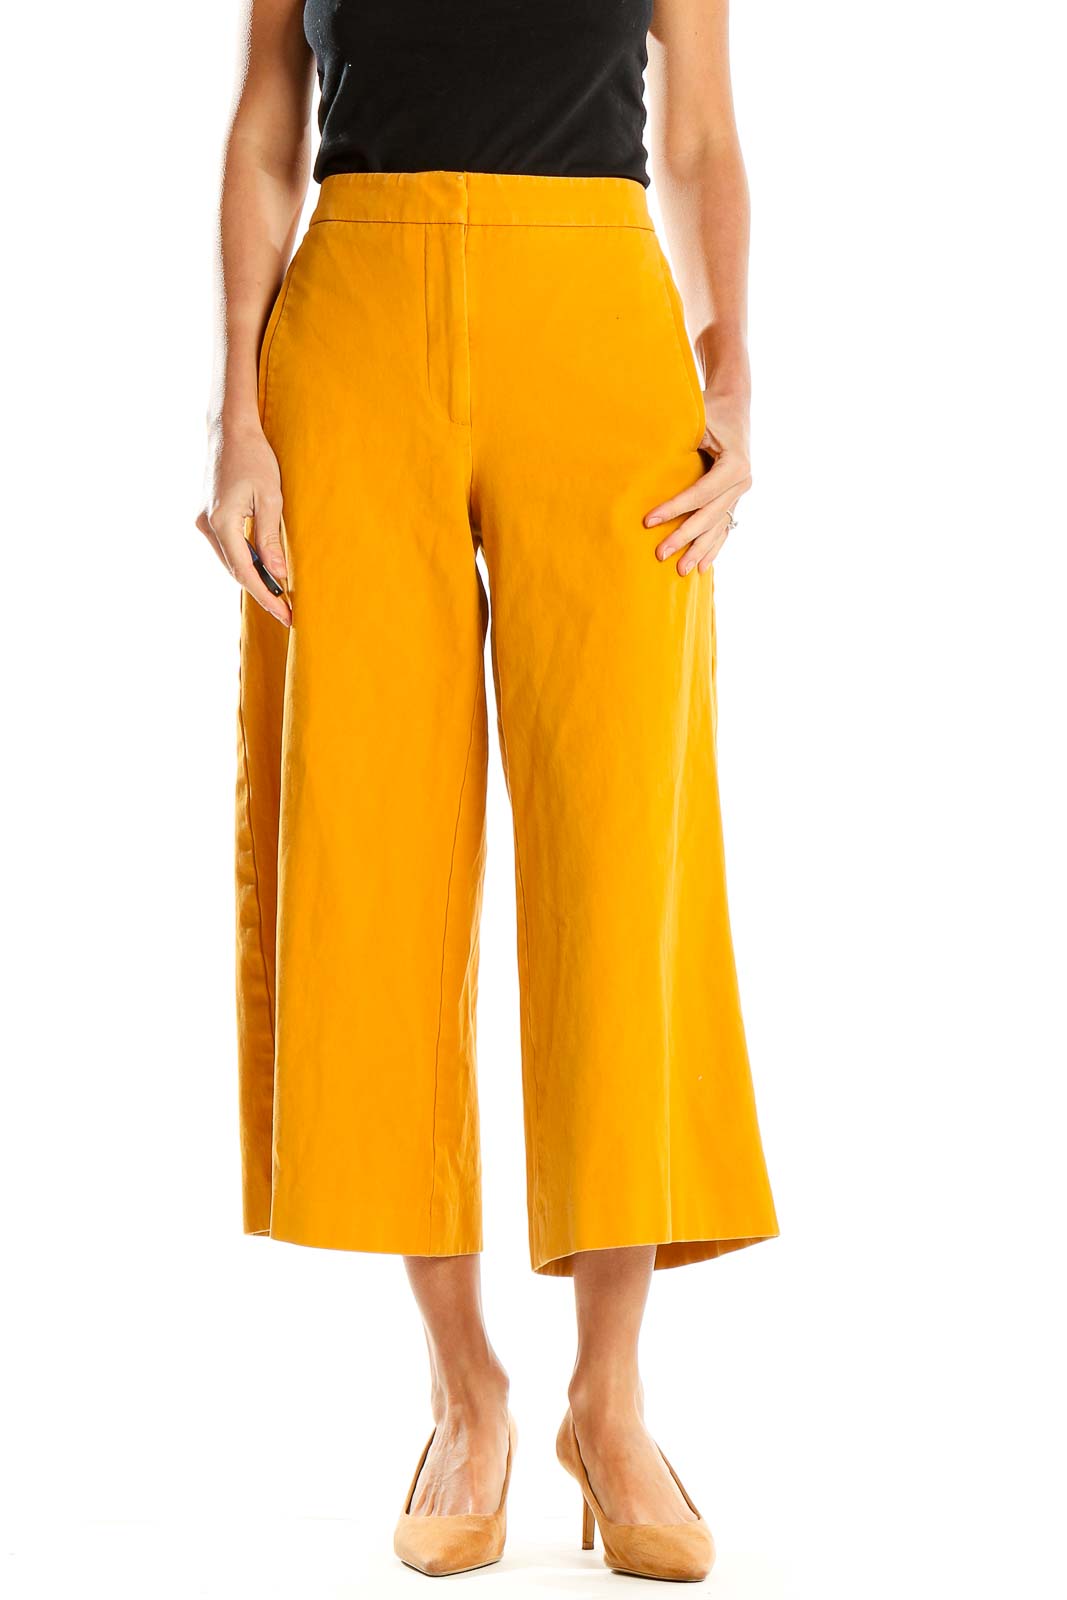 Yellow Culottes Pants Front